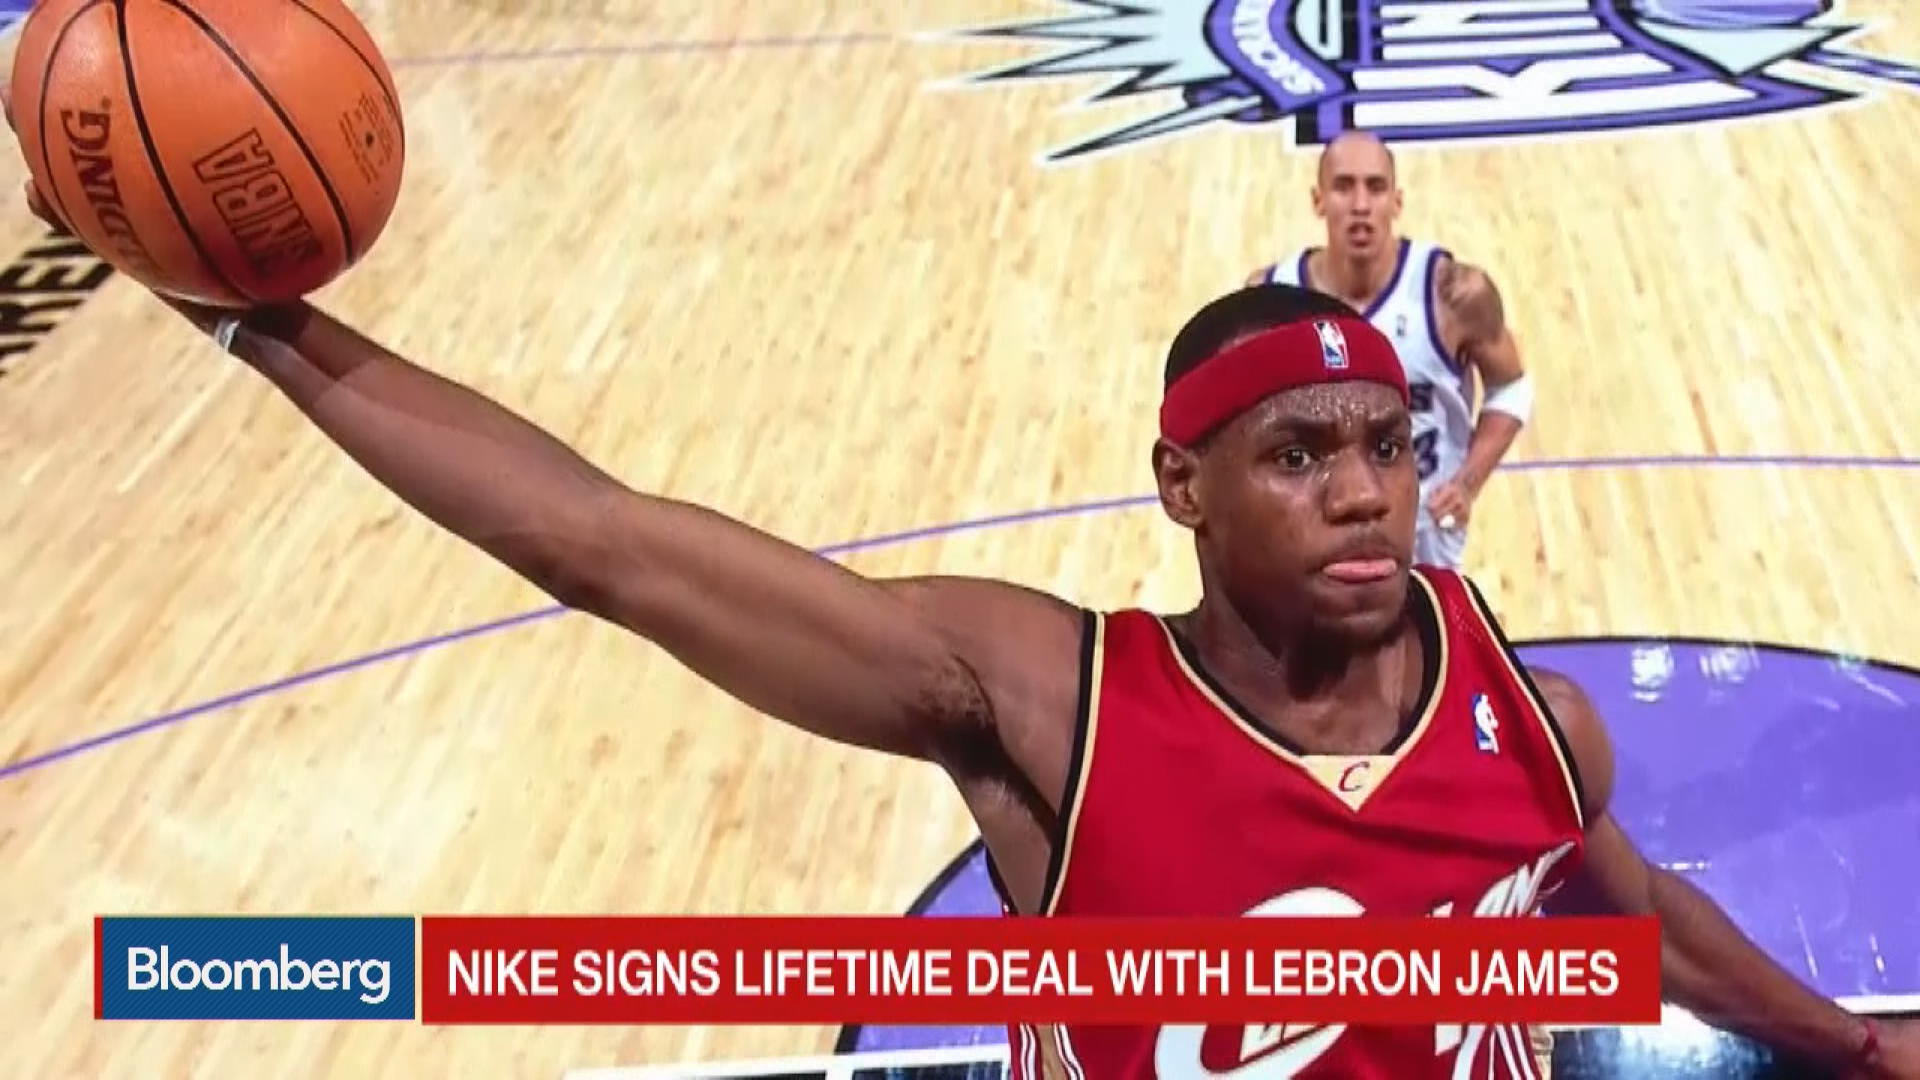 We are all witnesses: LeBron James signs historic lifetime deal